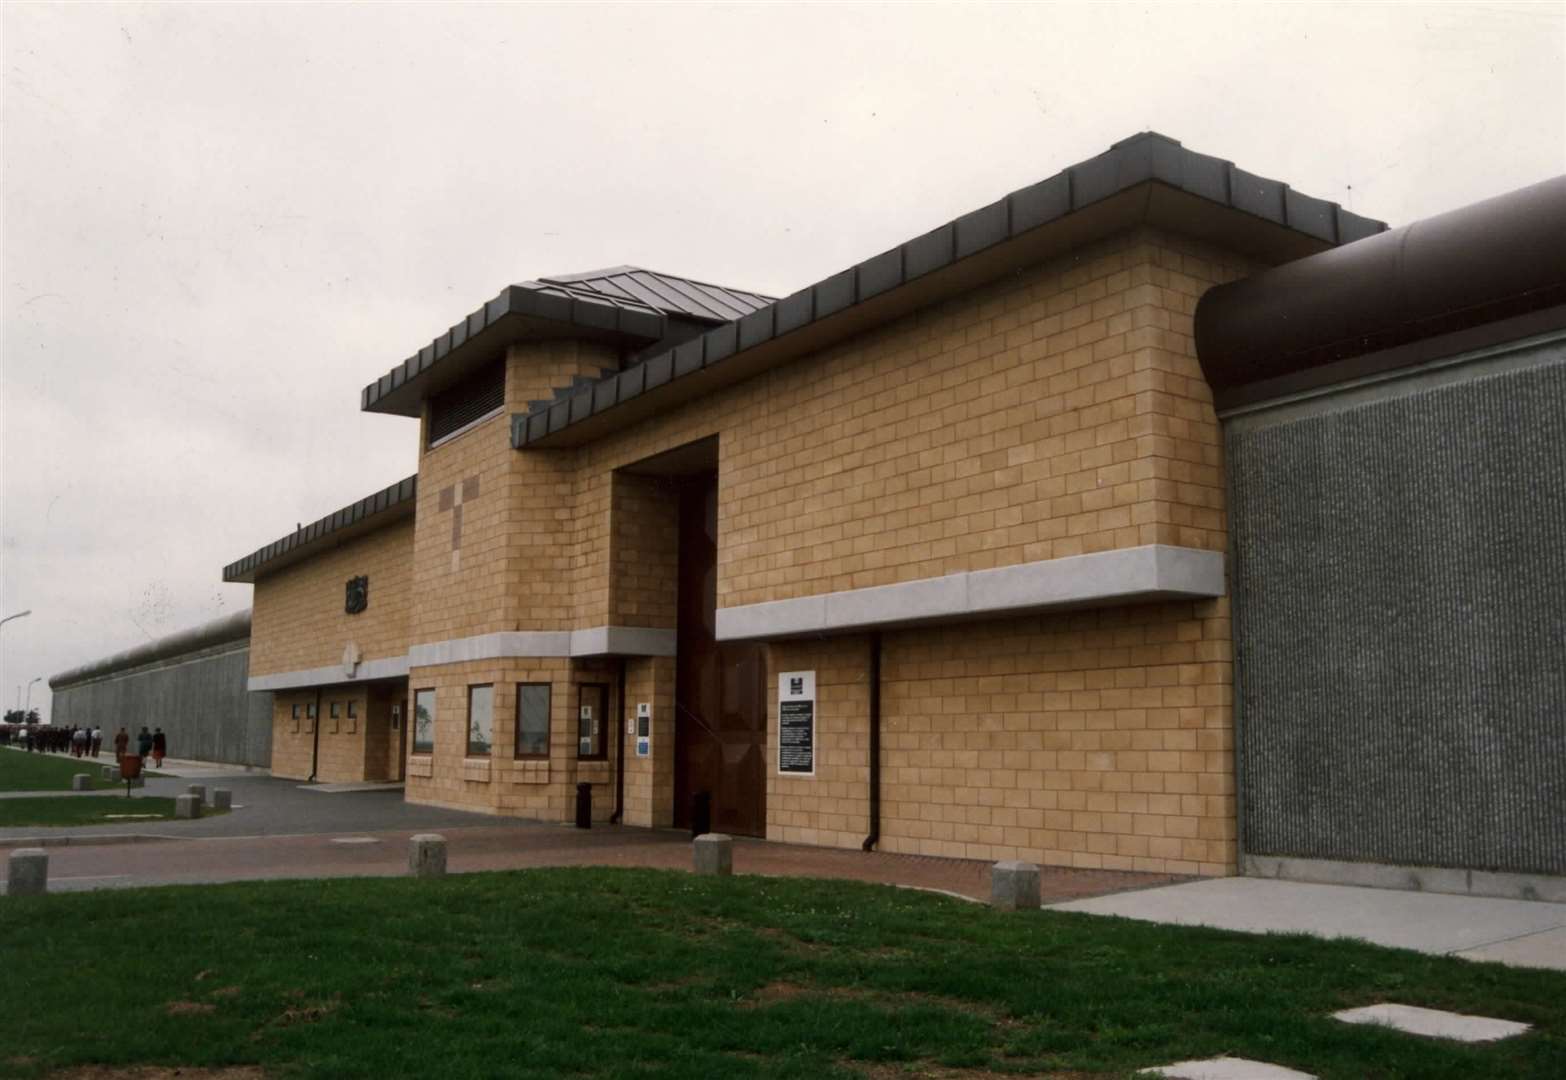 An outbreak of coronavirus at HMP Elmley on Sheppey has seen a trial have to be halted